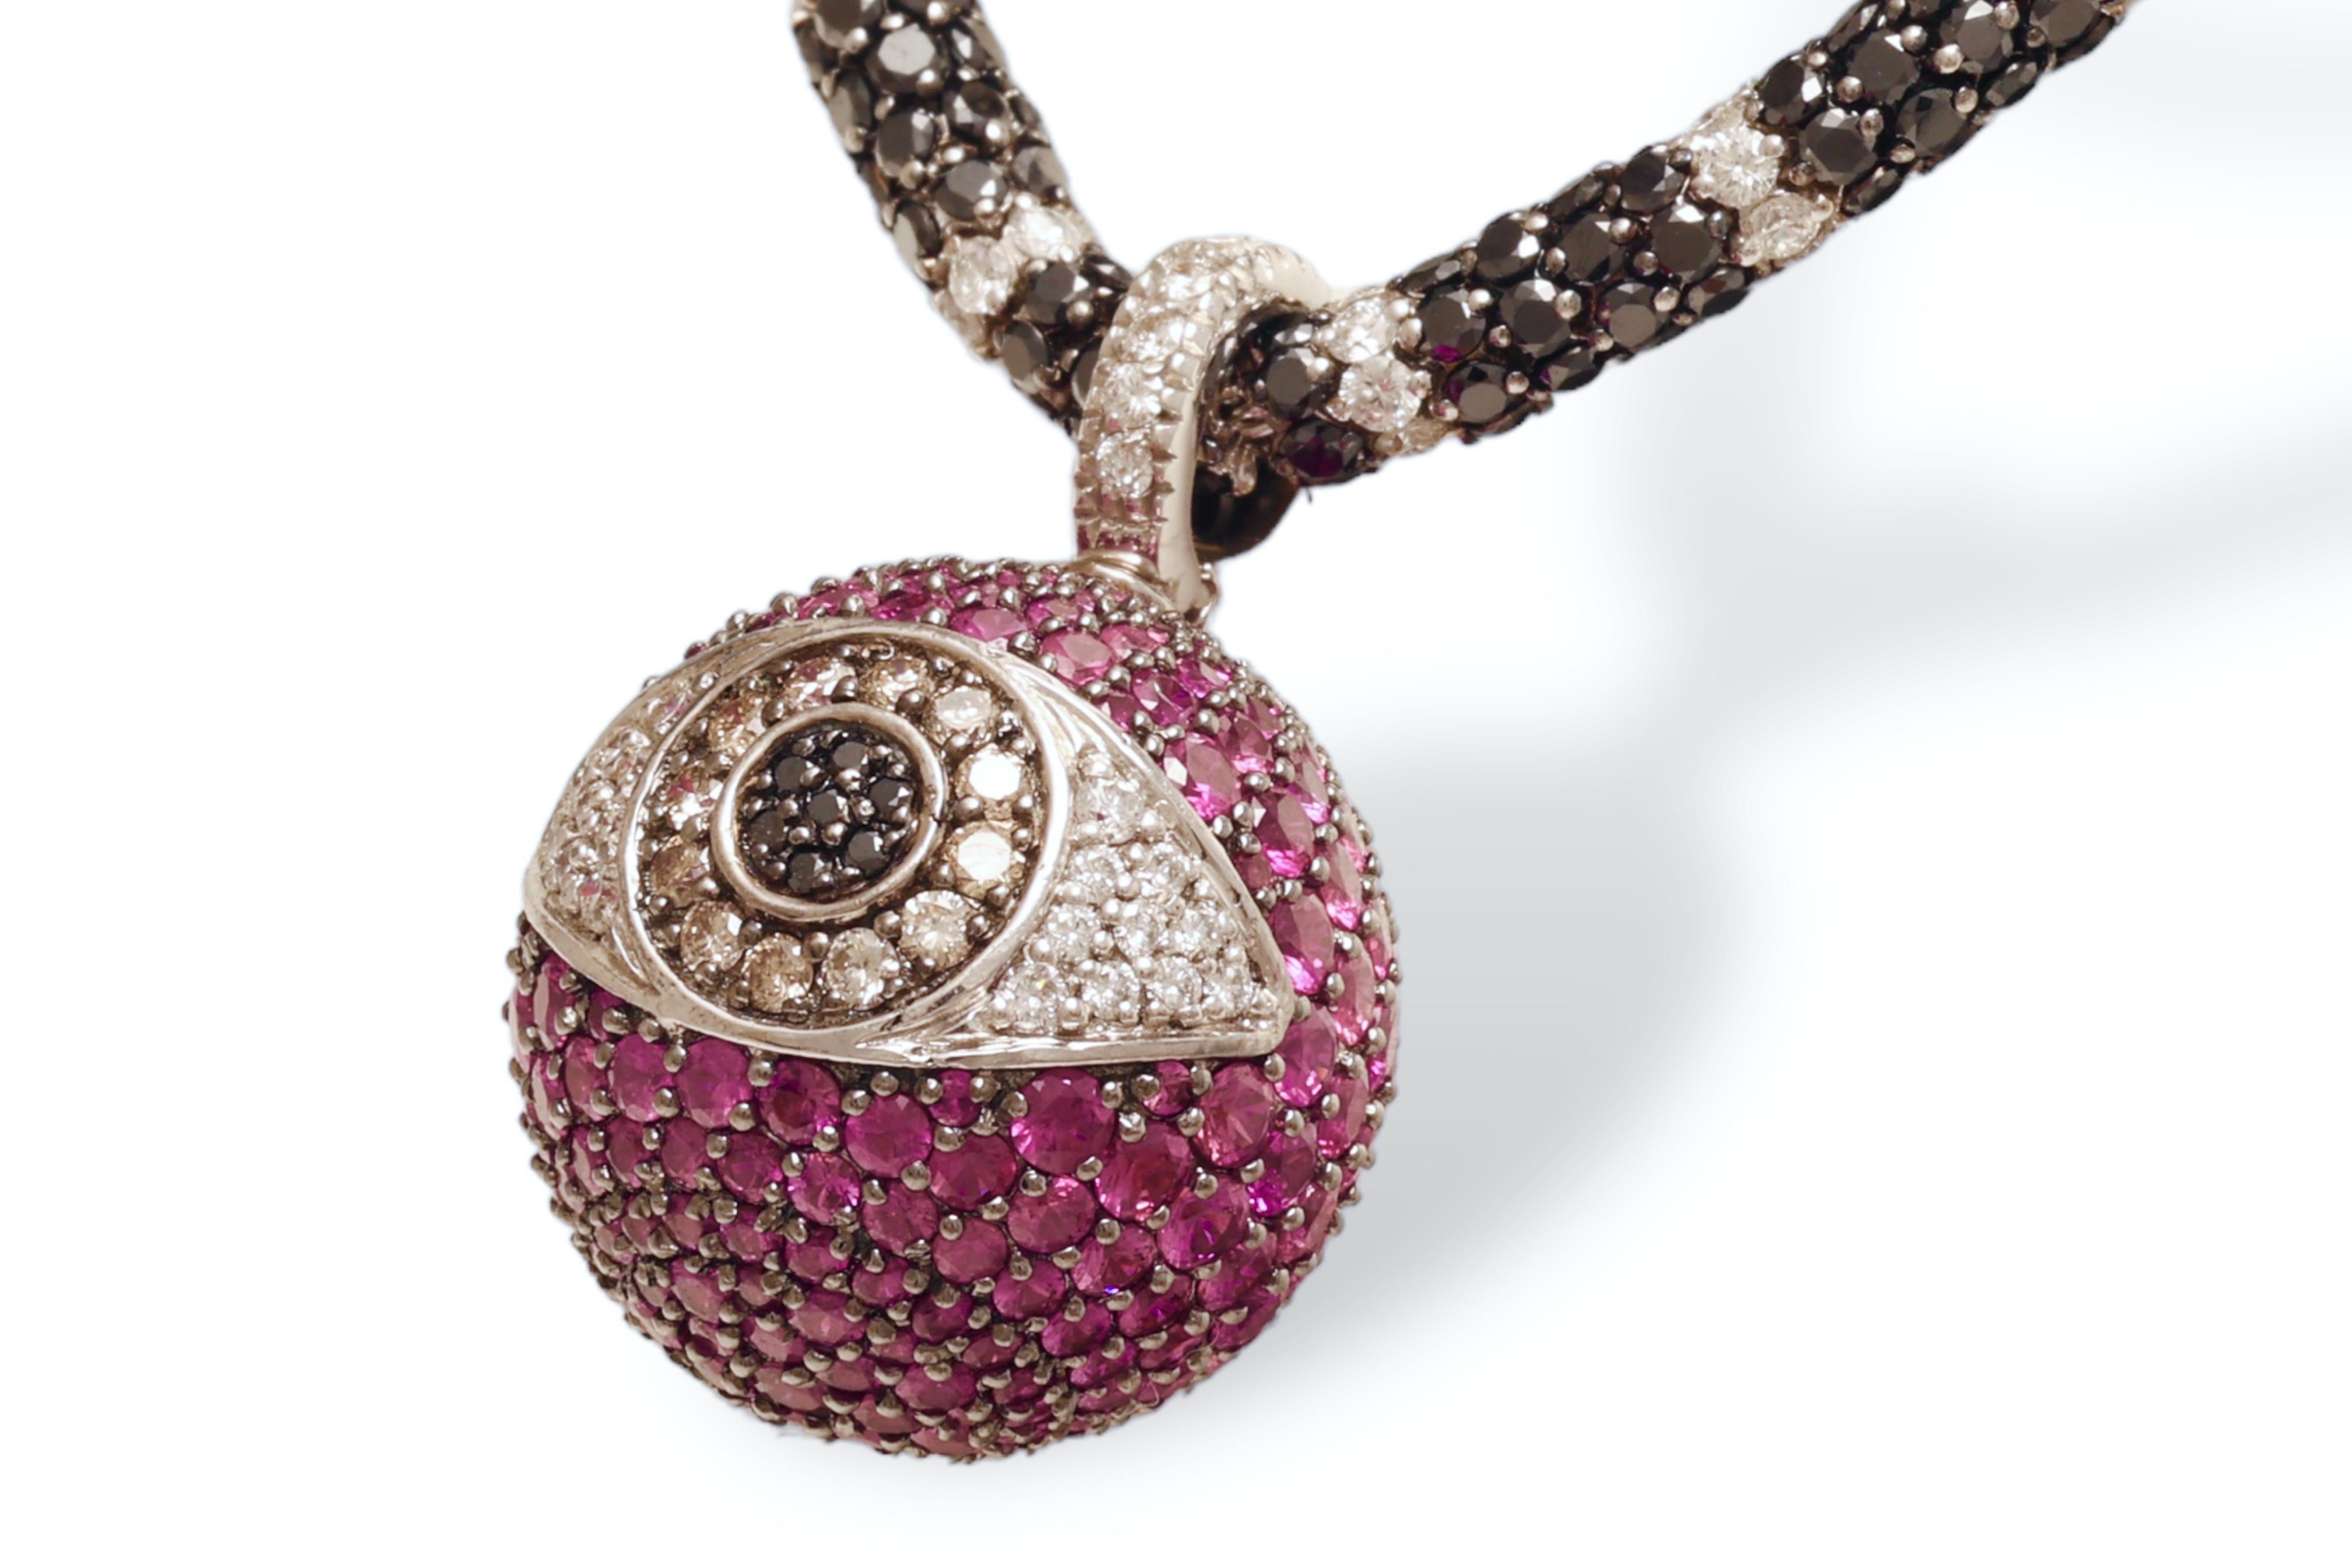 Brilliant Cut 18 Kt Gold Necklace & Pendant With 30 ct. Black & White Diamonds & Rubies For Sale